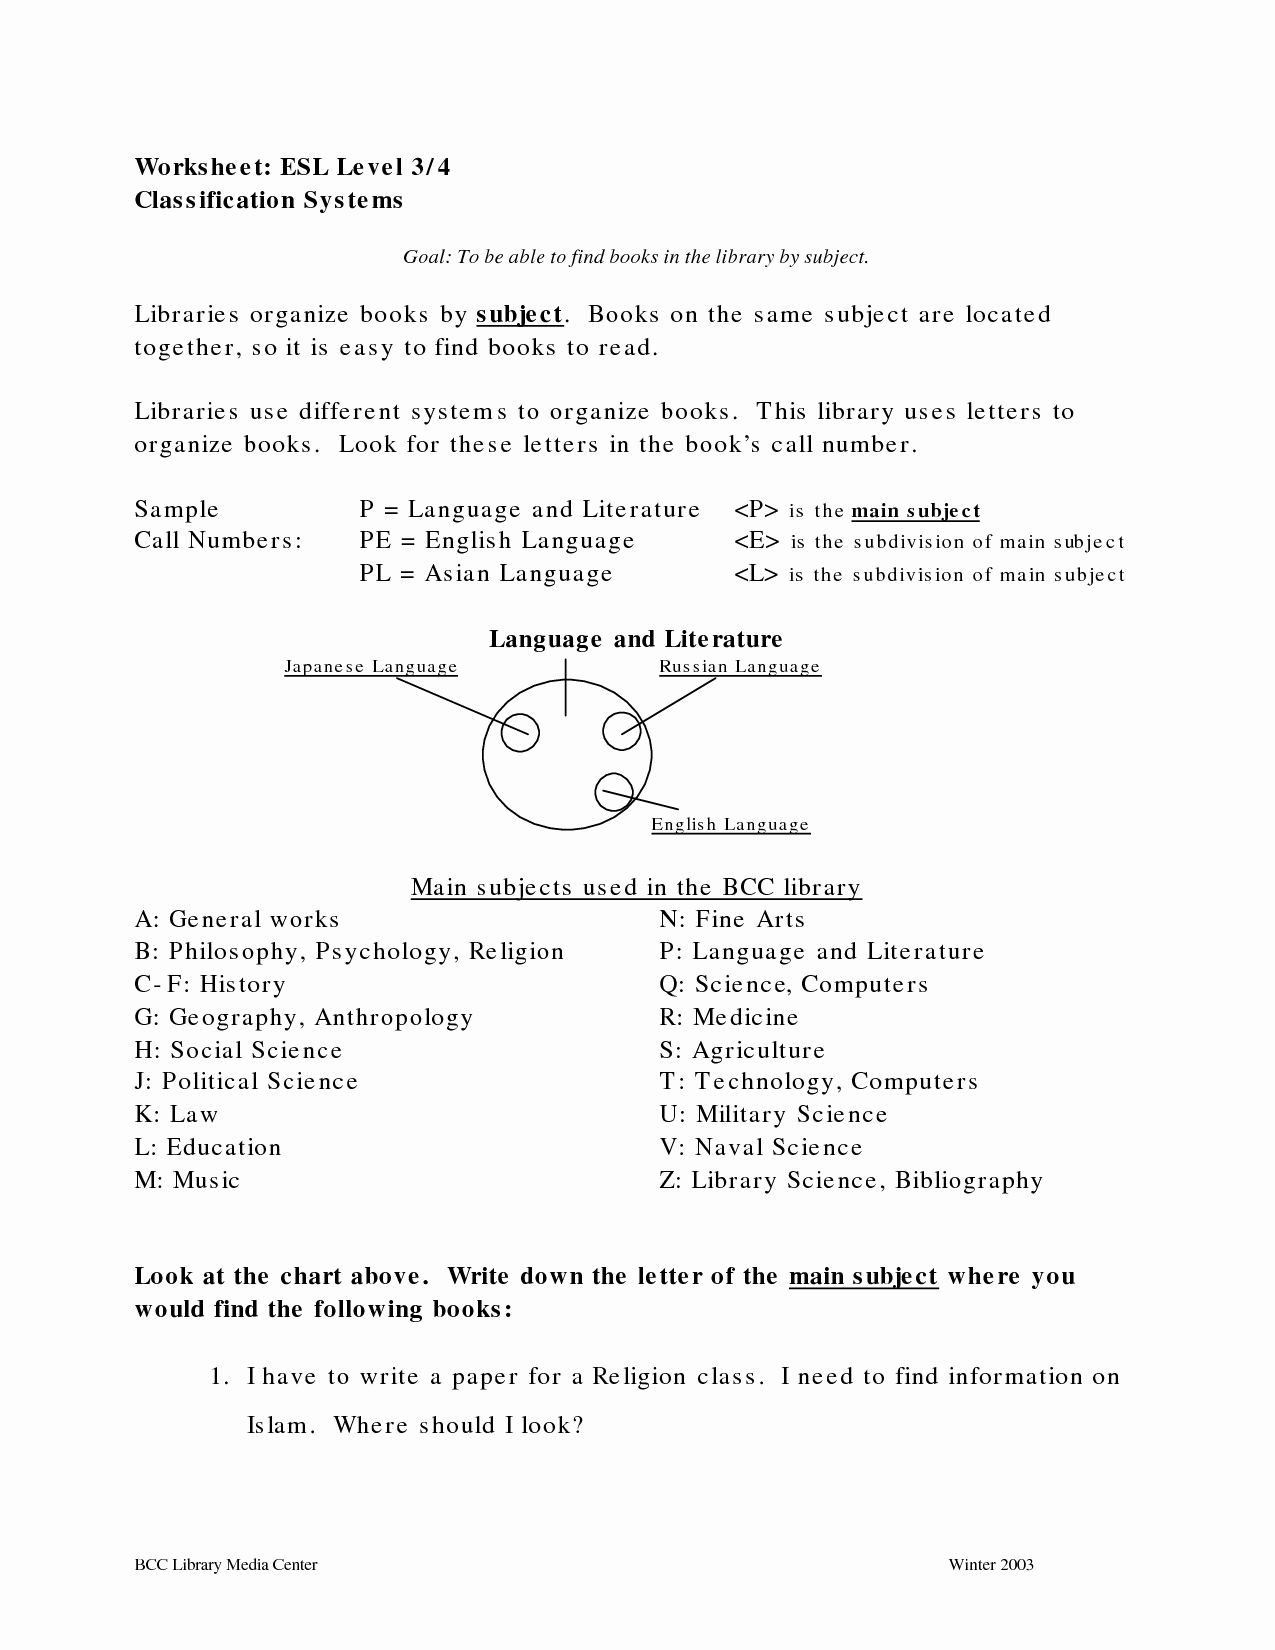 Biological Classification Worksheet Answers Inspirational 15 Best Of Classification Worksheets for Middle